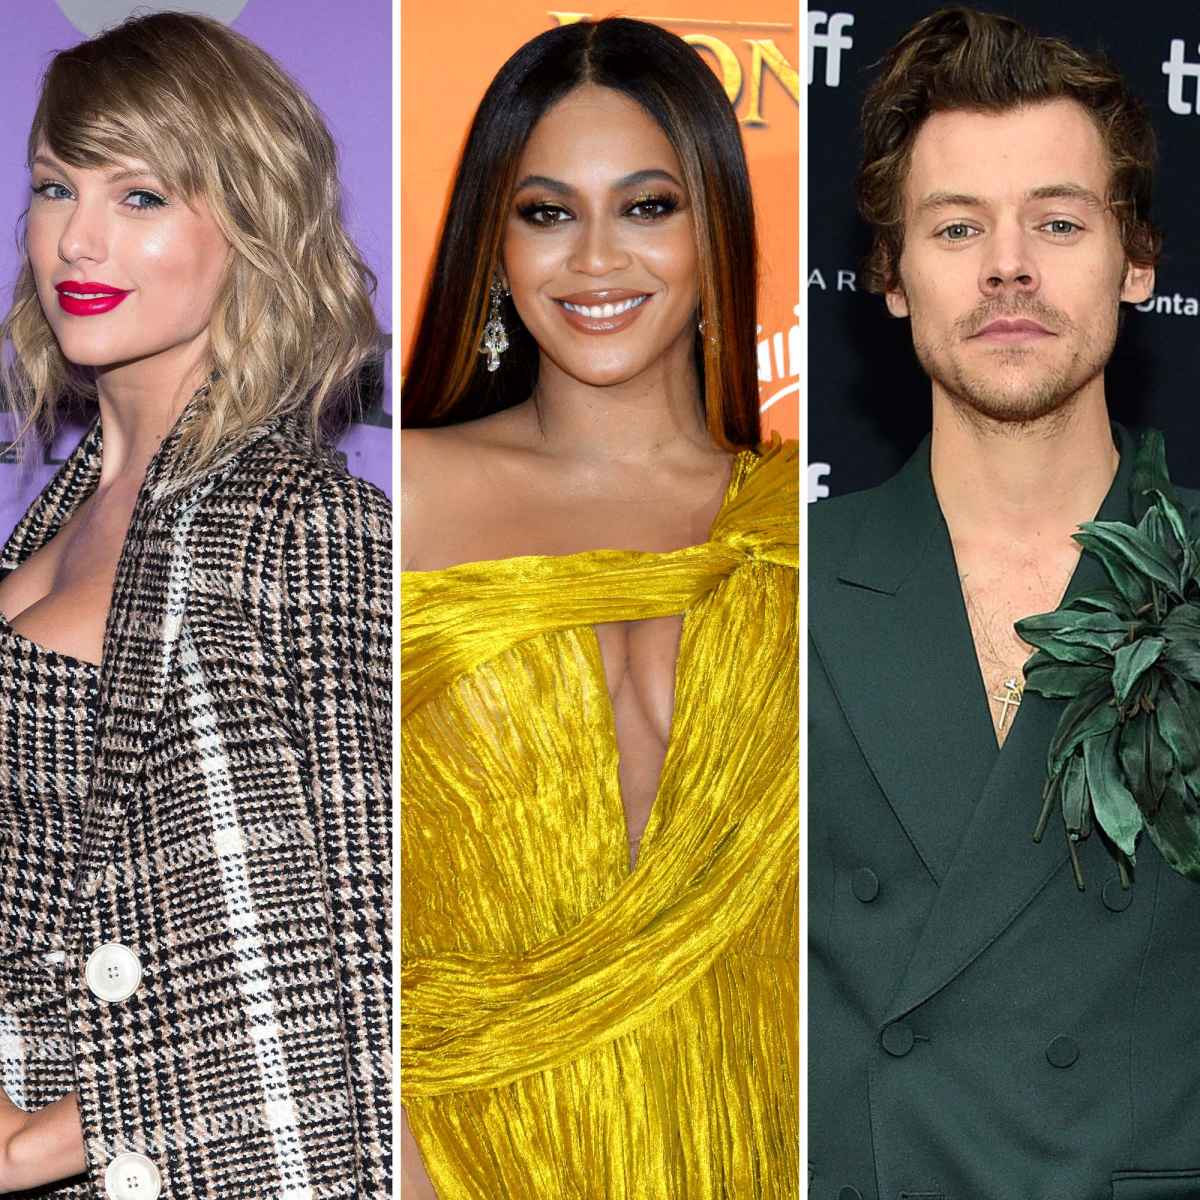 How to Vote for the 2022 American Music Awards